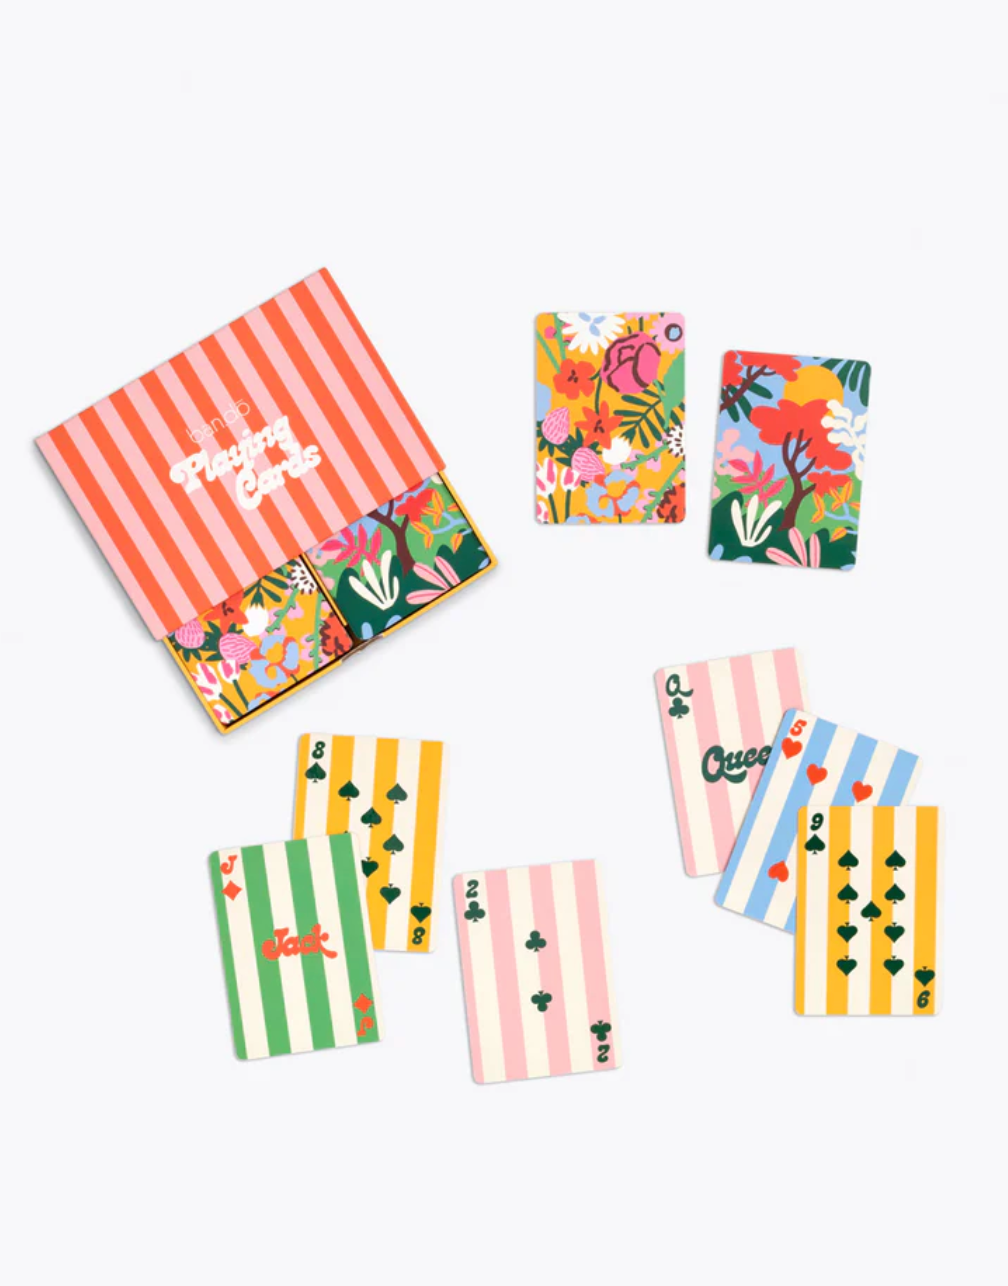 Floral Playing Cards